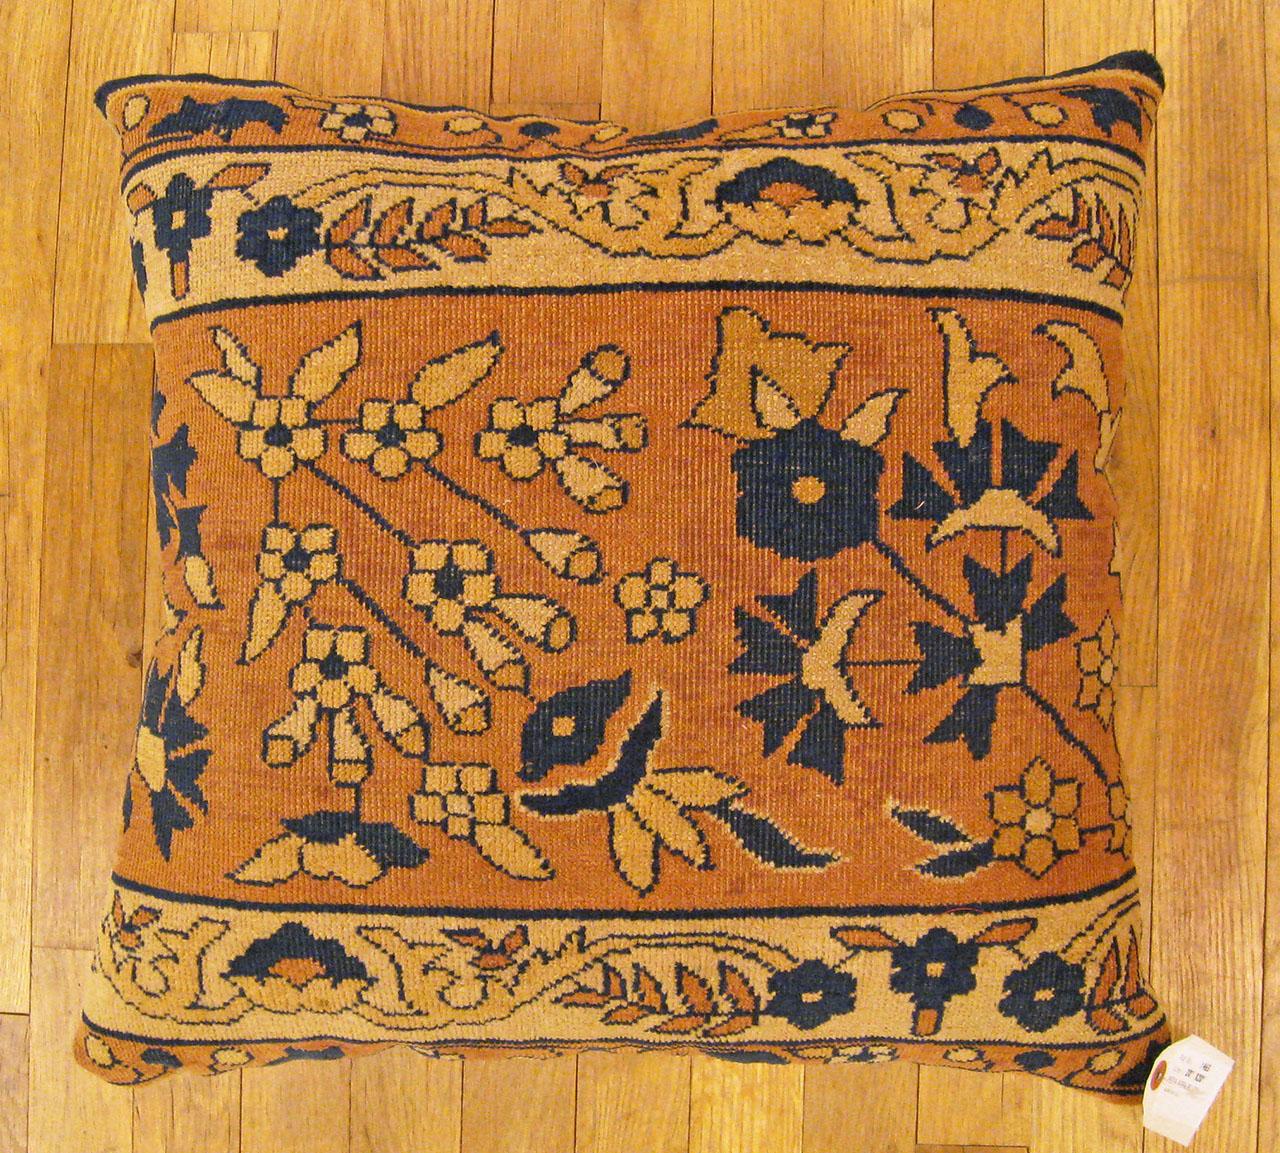 Antique Indian Agra rug pillow; size 1'8” x 1'8”.

An antique decorative pillow with floral elements allover a salmon central field, size 1'8” x 1'8”. This lovely decorative pillow features an antique fabric of a Agra rug on front which is